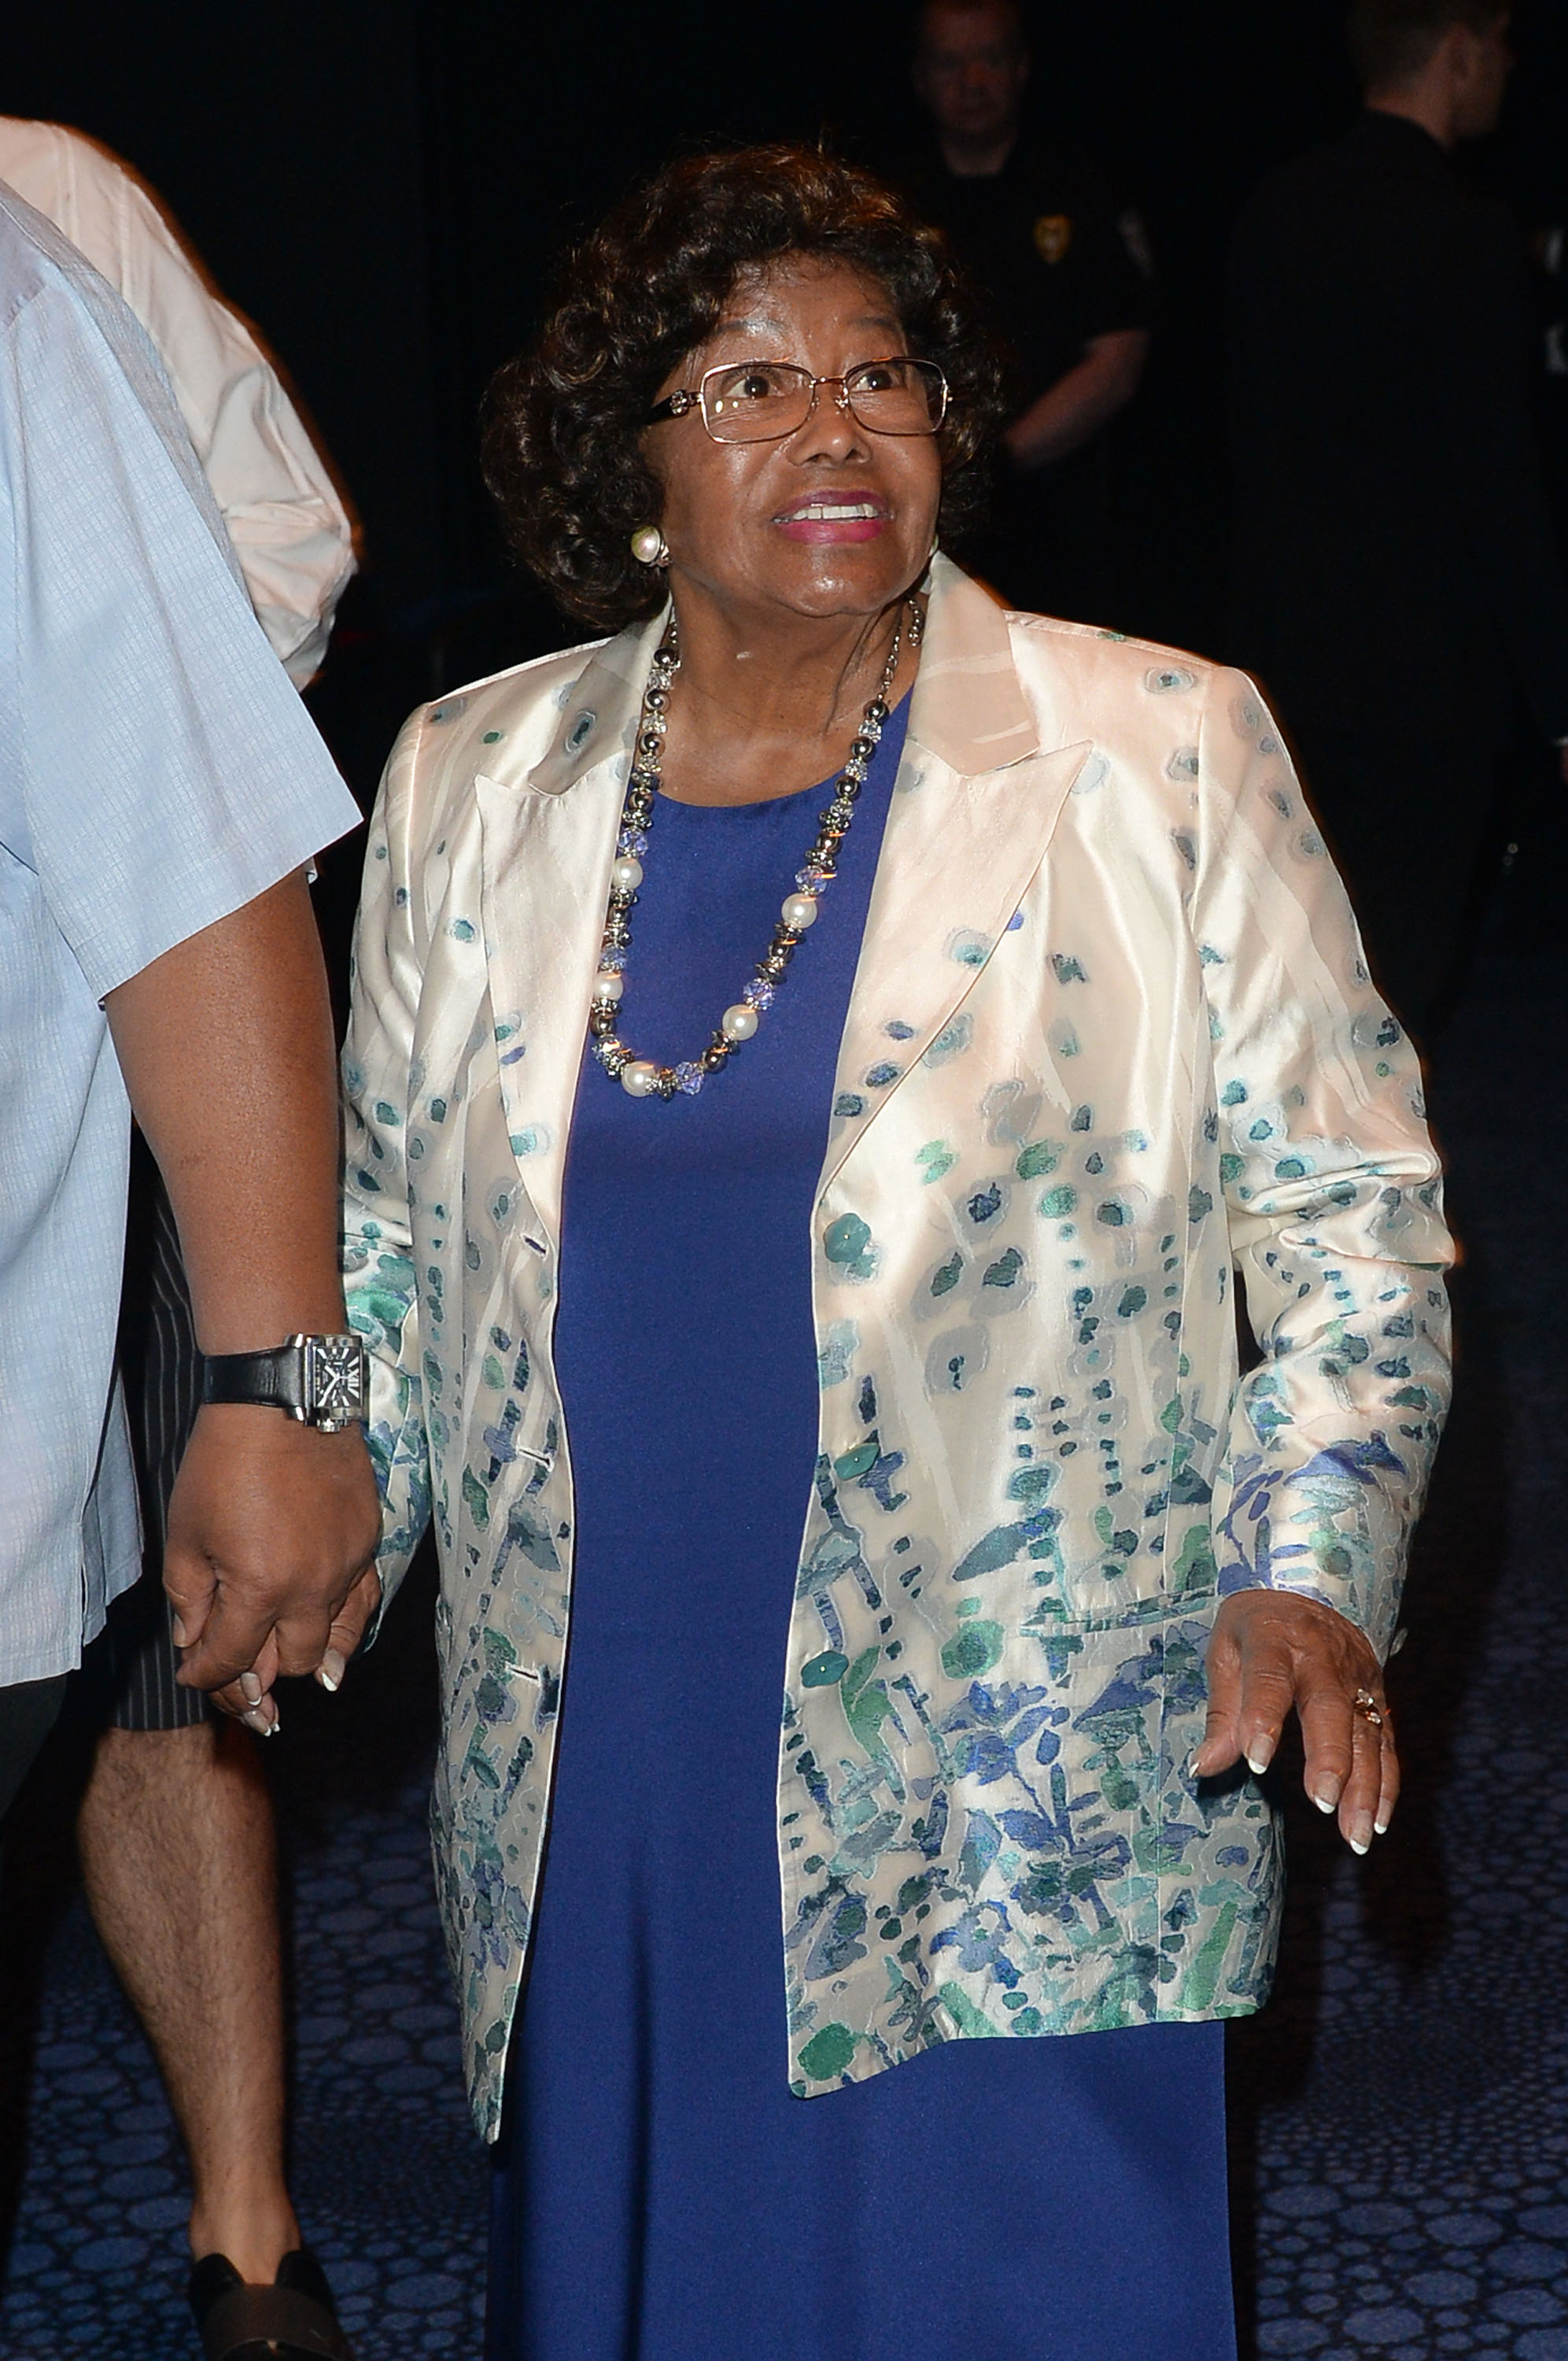 Katherine Jackson at the world premiere of "Michael Jackson ONE by Cirque du Soleil" in Las Vegas, Nevada on June 29, 2013 | Source: Getty Images